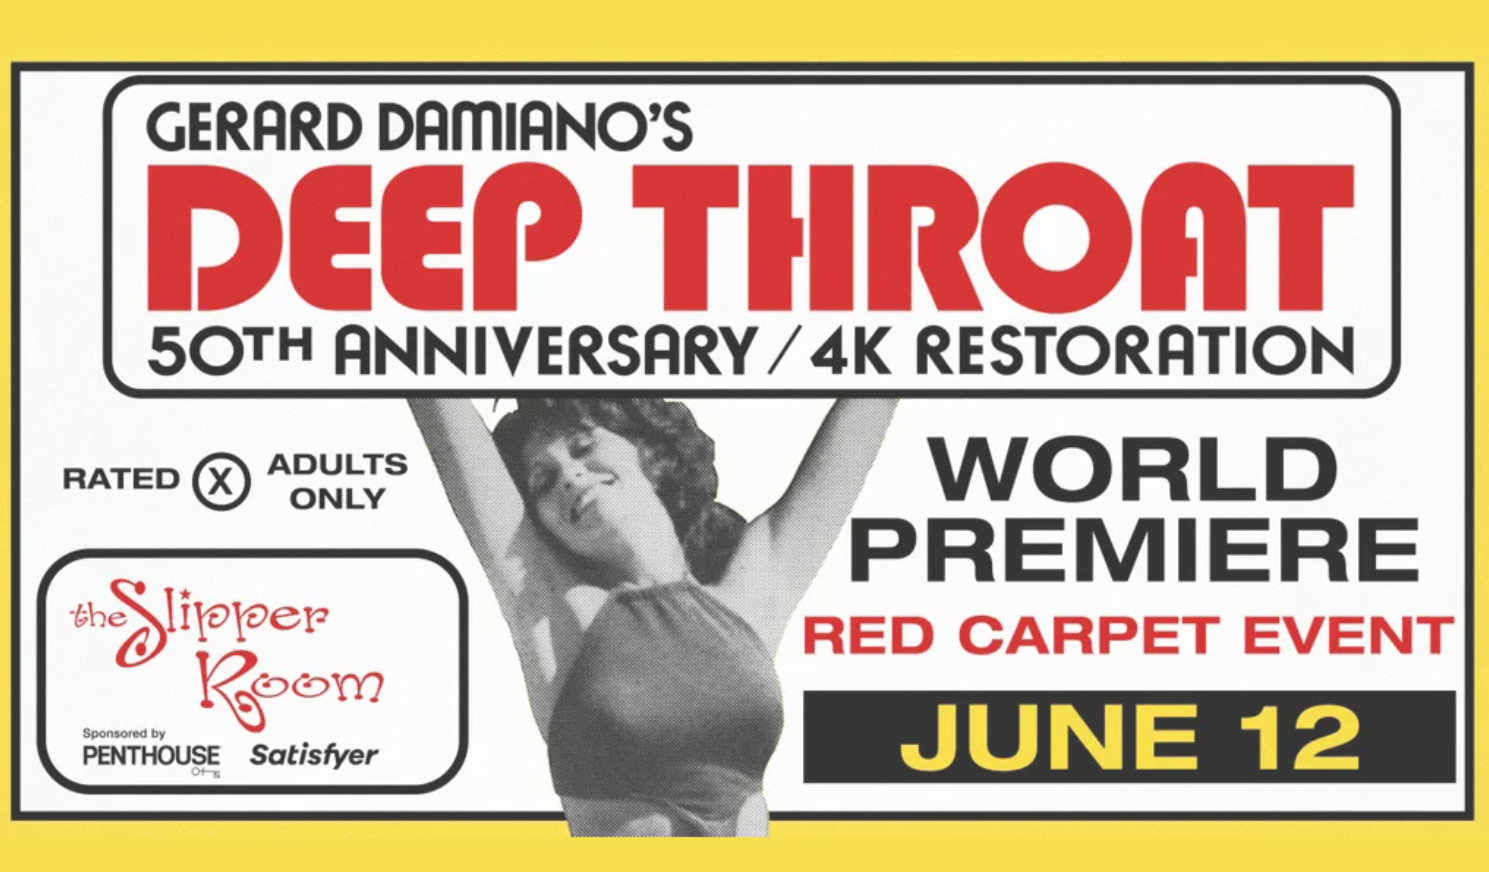 Damiano Family To Tour Deep Throat For Its 50th Anniversary